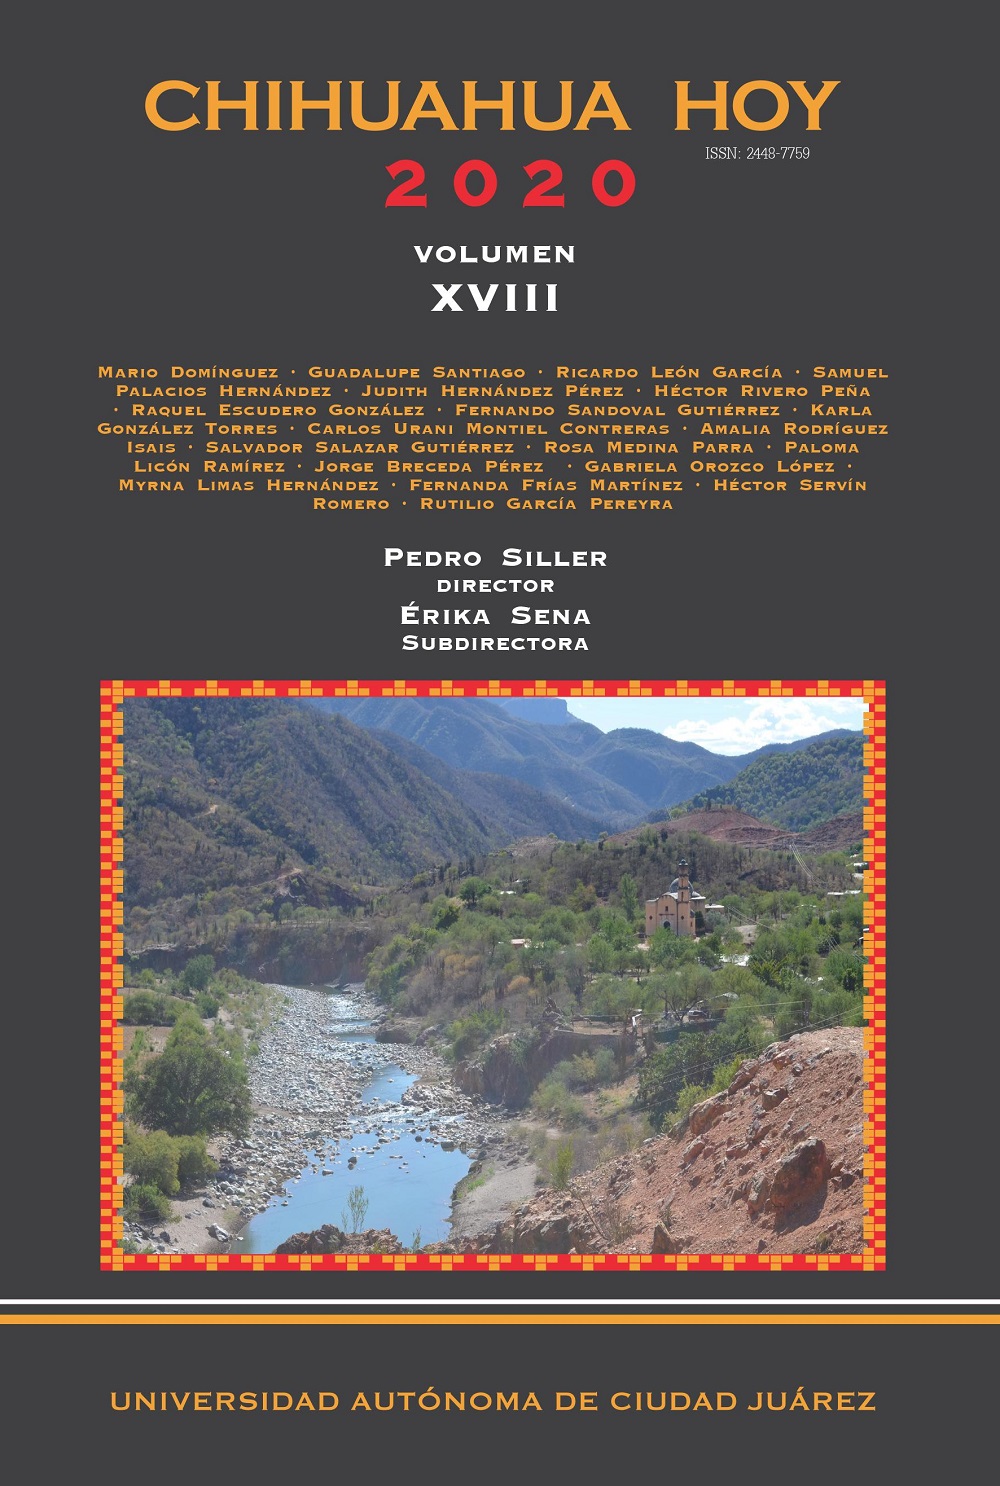 Presence of the civilizing process in Chihuahua historiography: model, typology and heritance